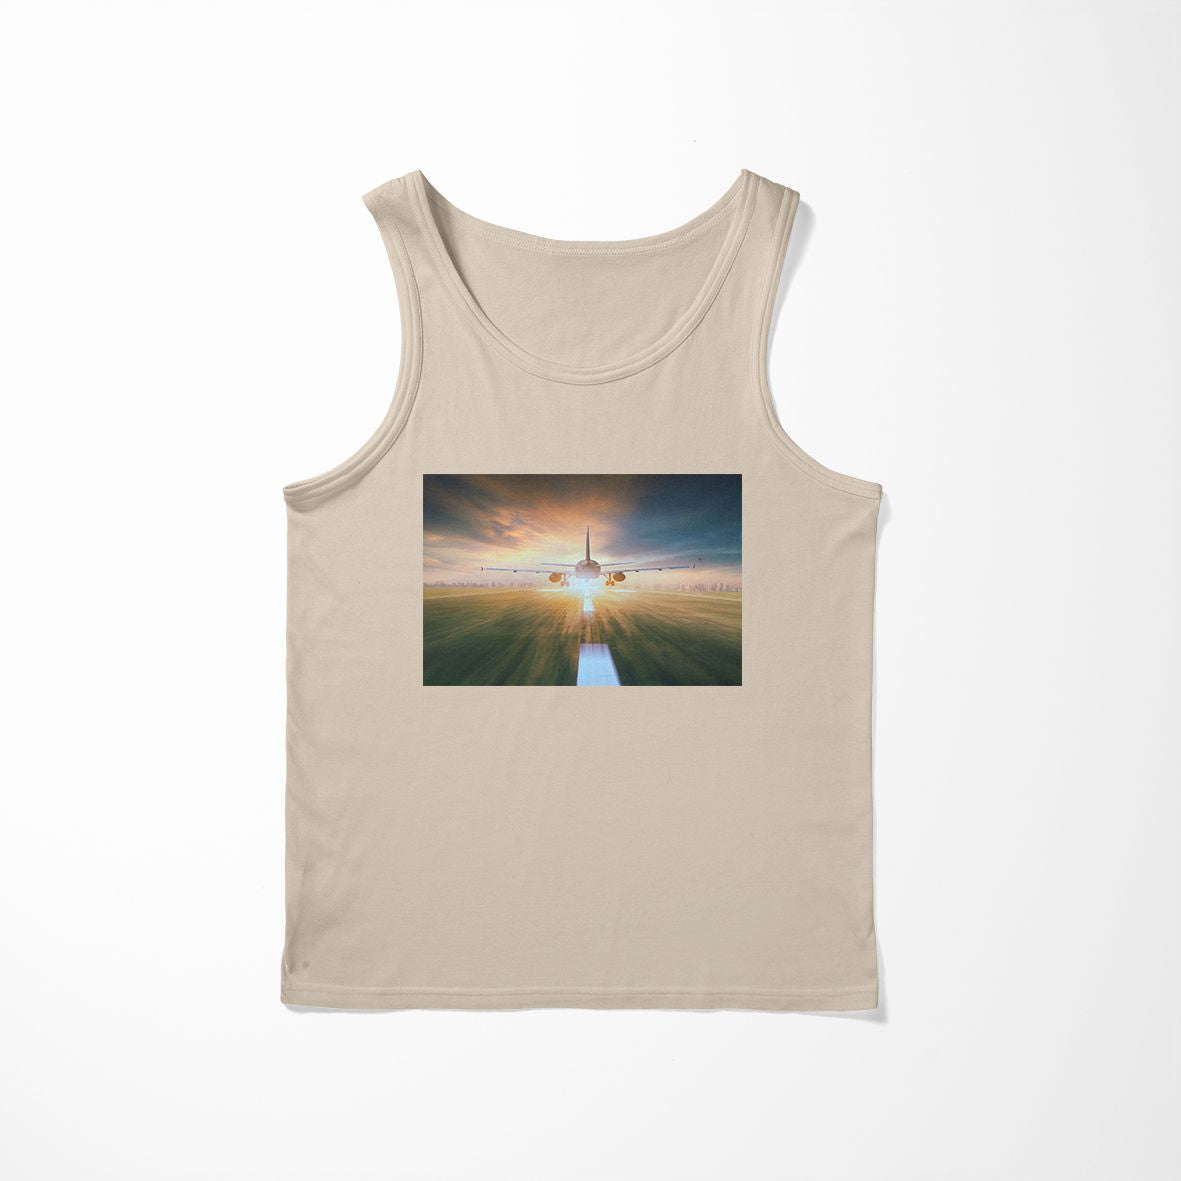 Airplane Flying Over Runway Designed Tank Tops